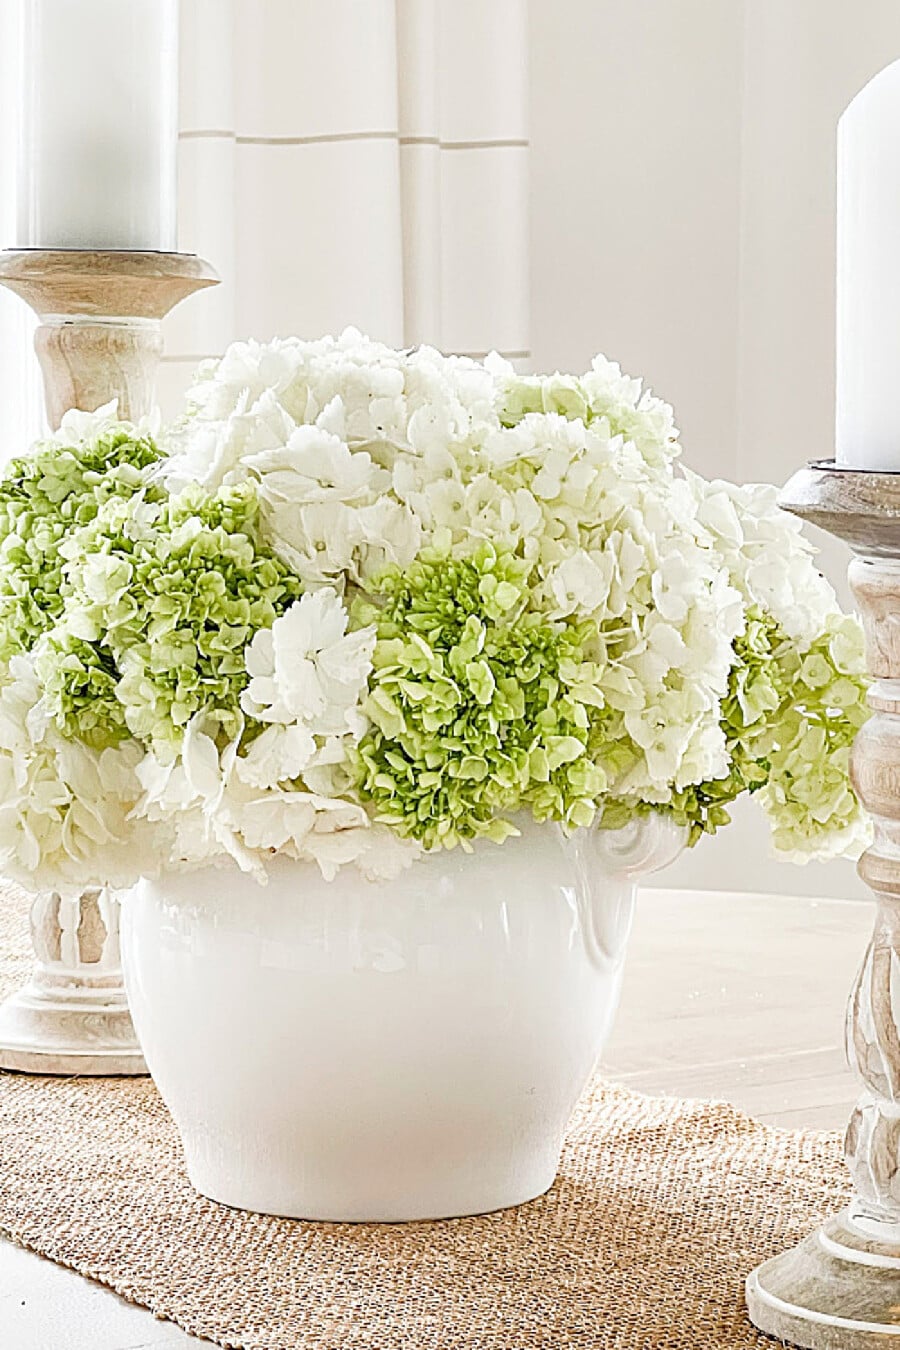 HOW TO KEEP CUT HYDRANGEAS FROM WILTING